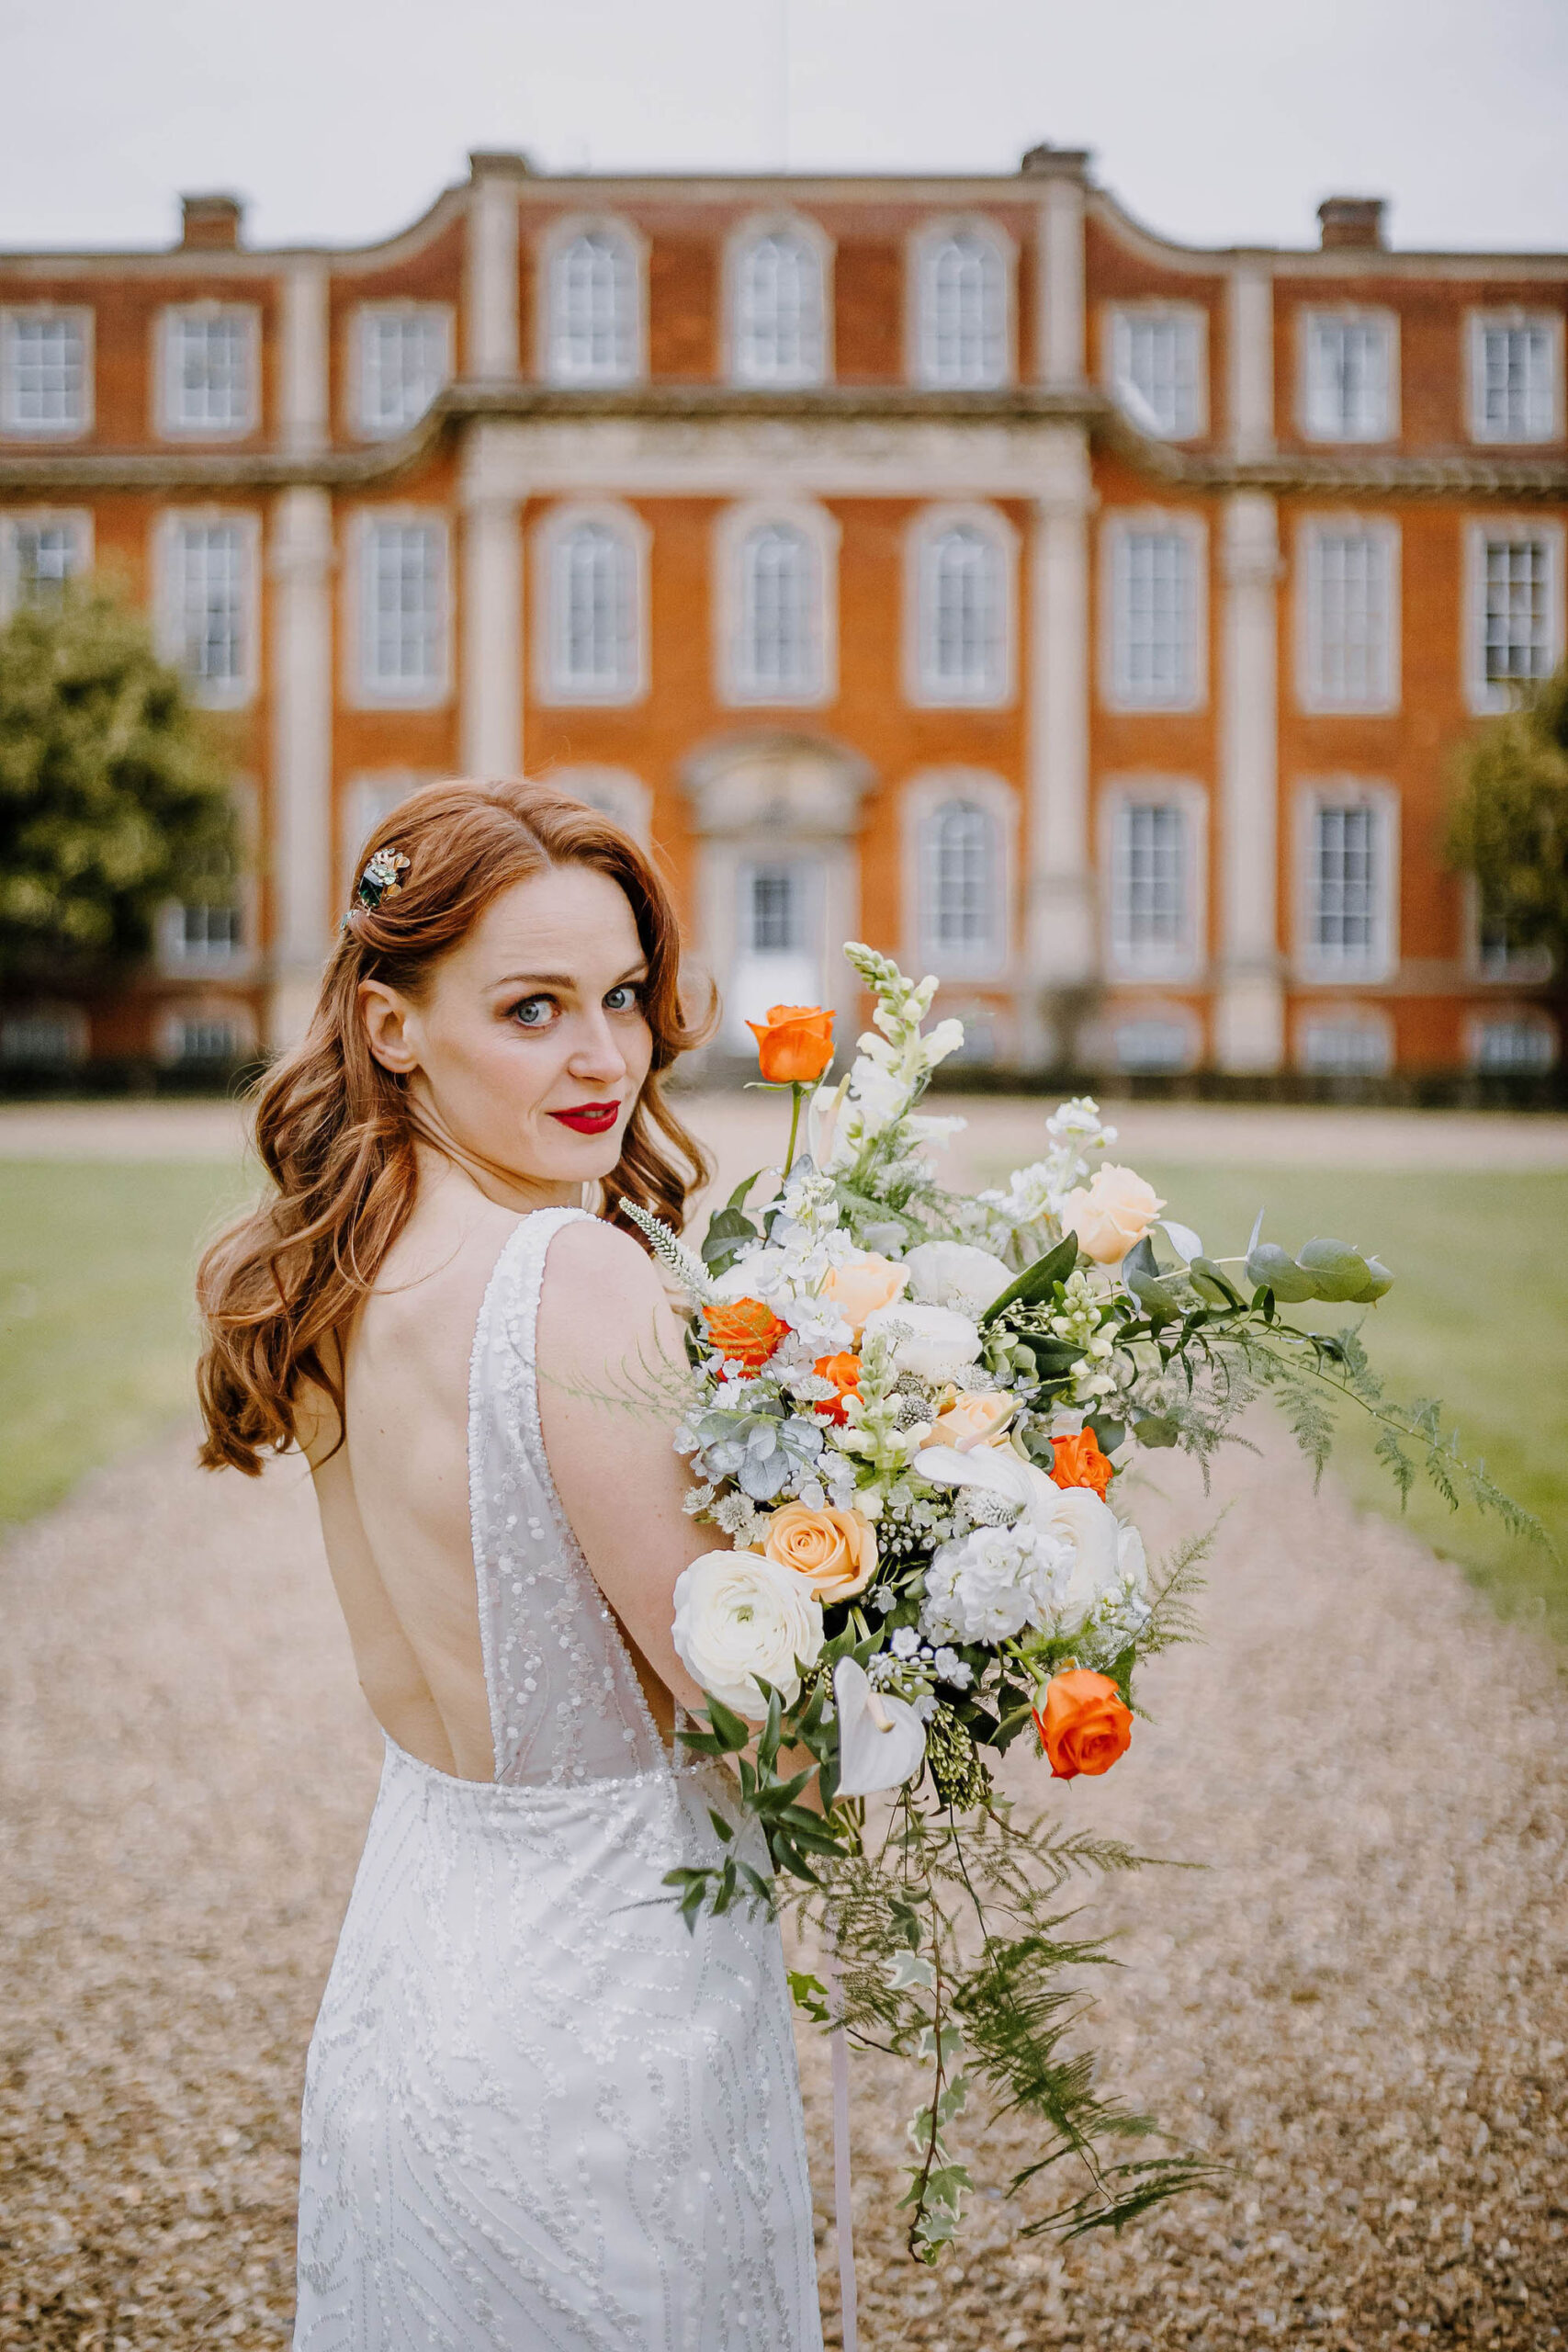 A model in a bridal dress holds a bouquet of white, peach and coral coloured flowers